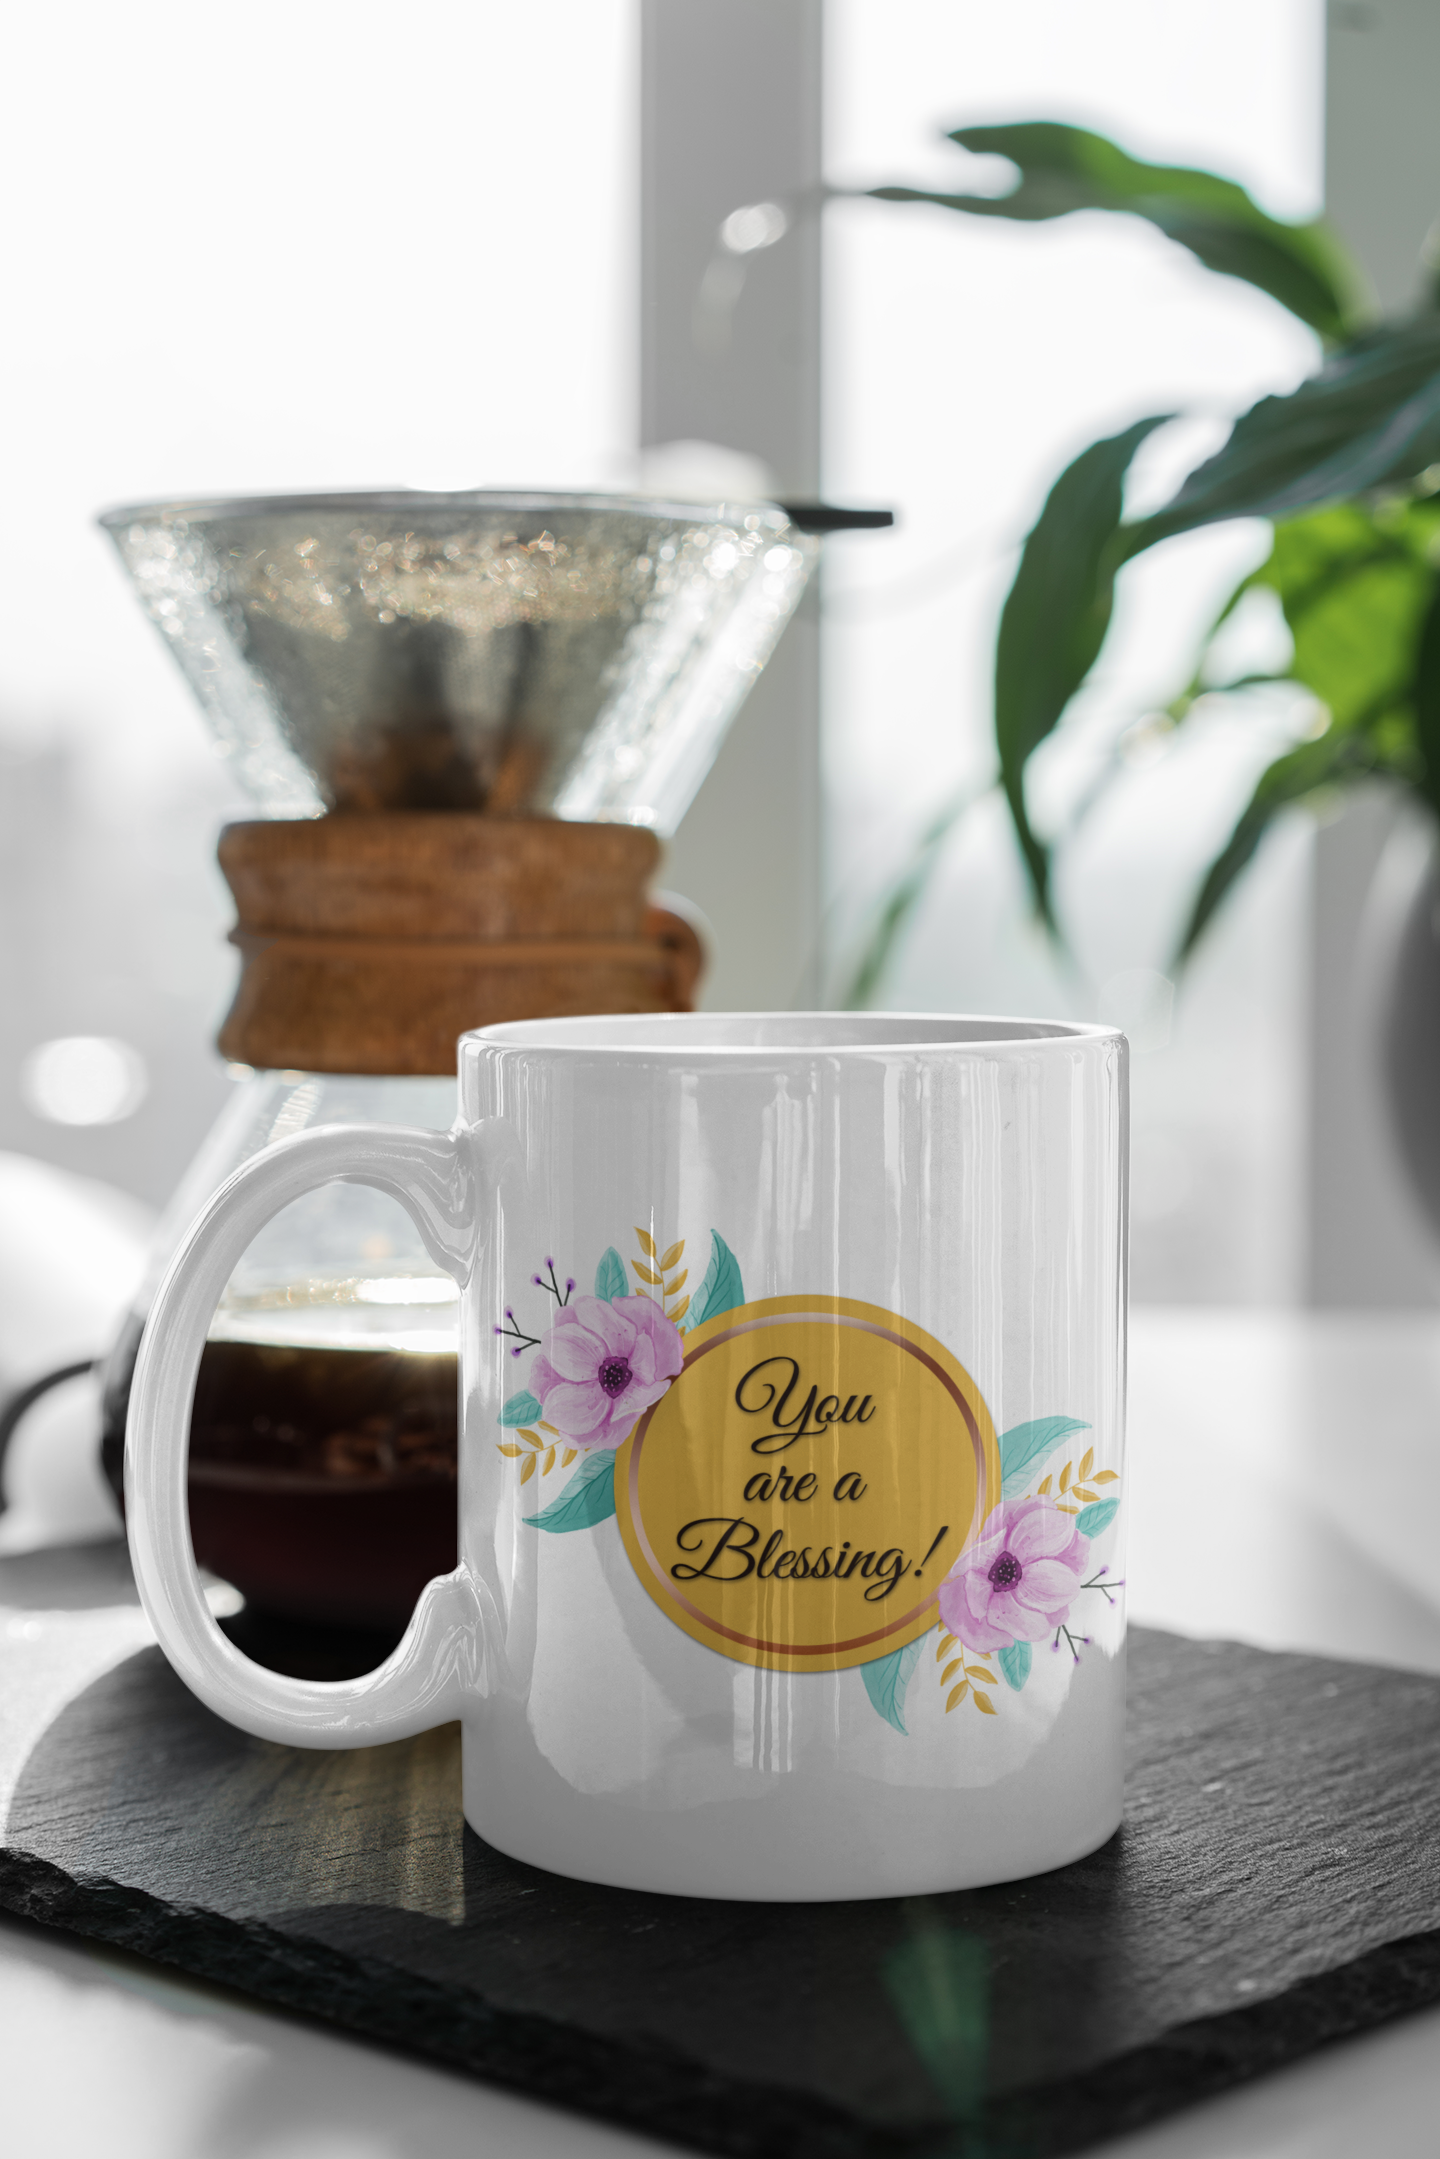 You are a Blessing! - Coffee Mugs